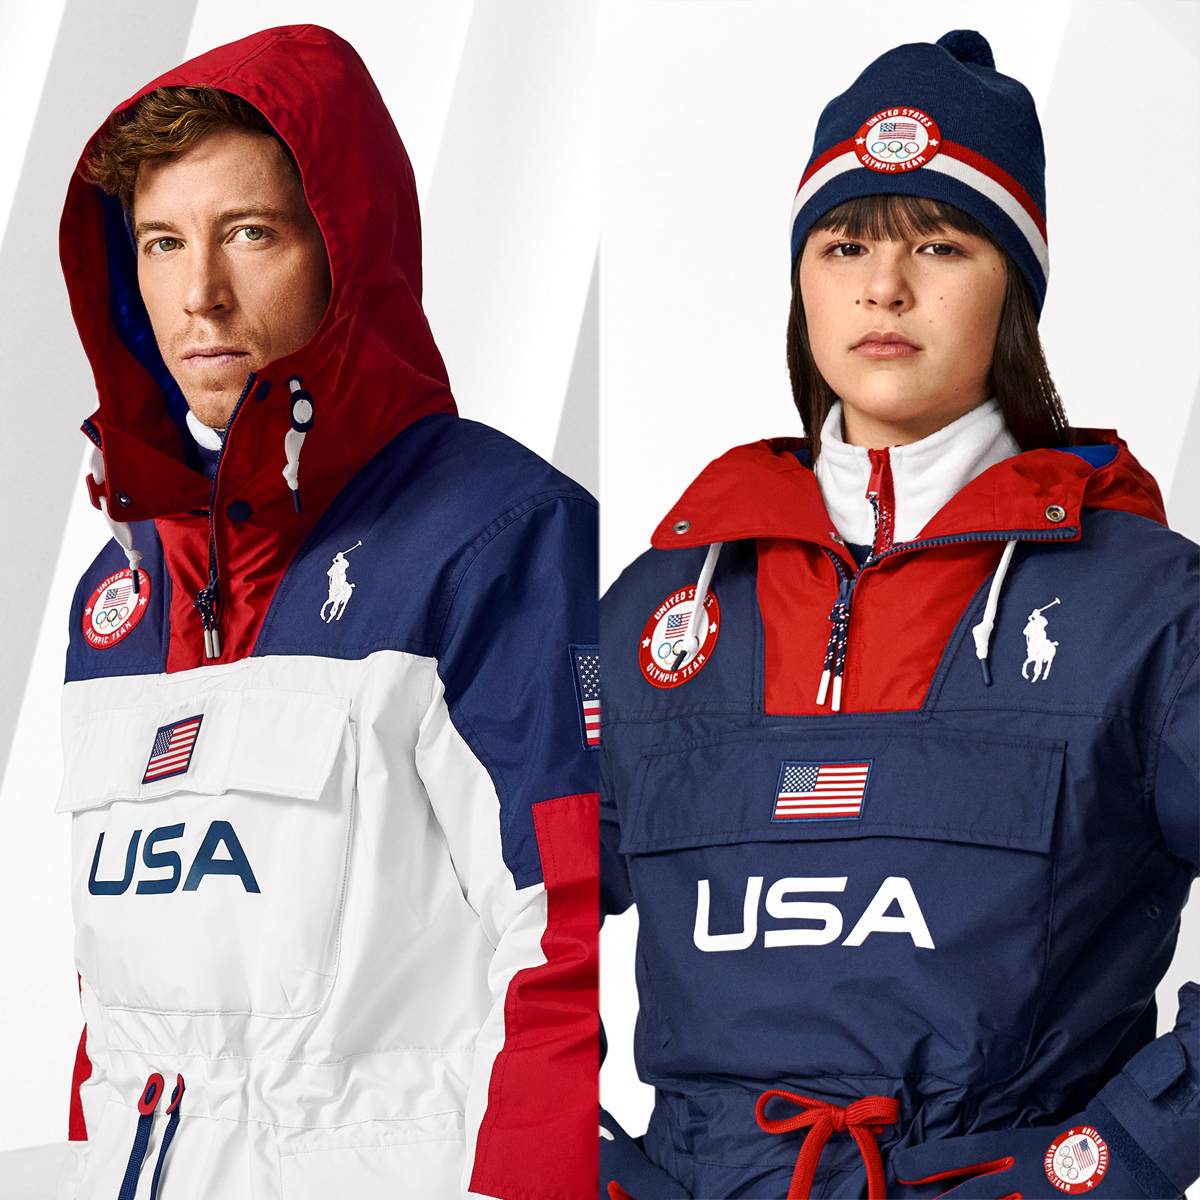 Ralph Lauren Unveils Team USA's Uniforms for the Olympic Winter Games